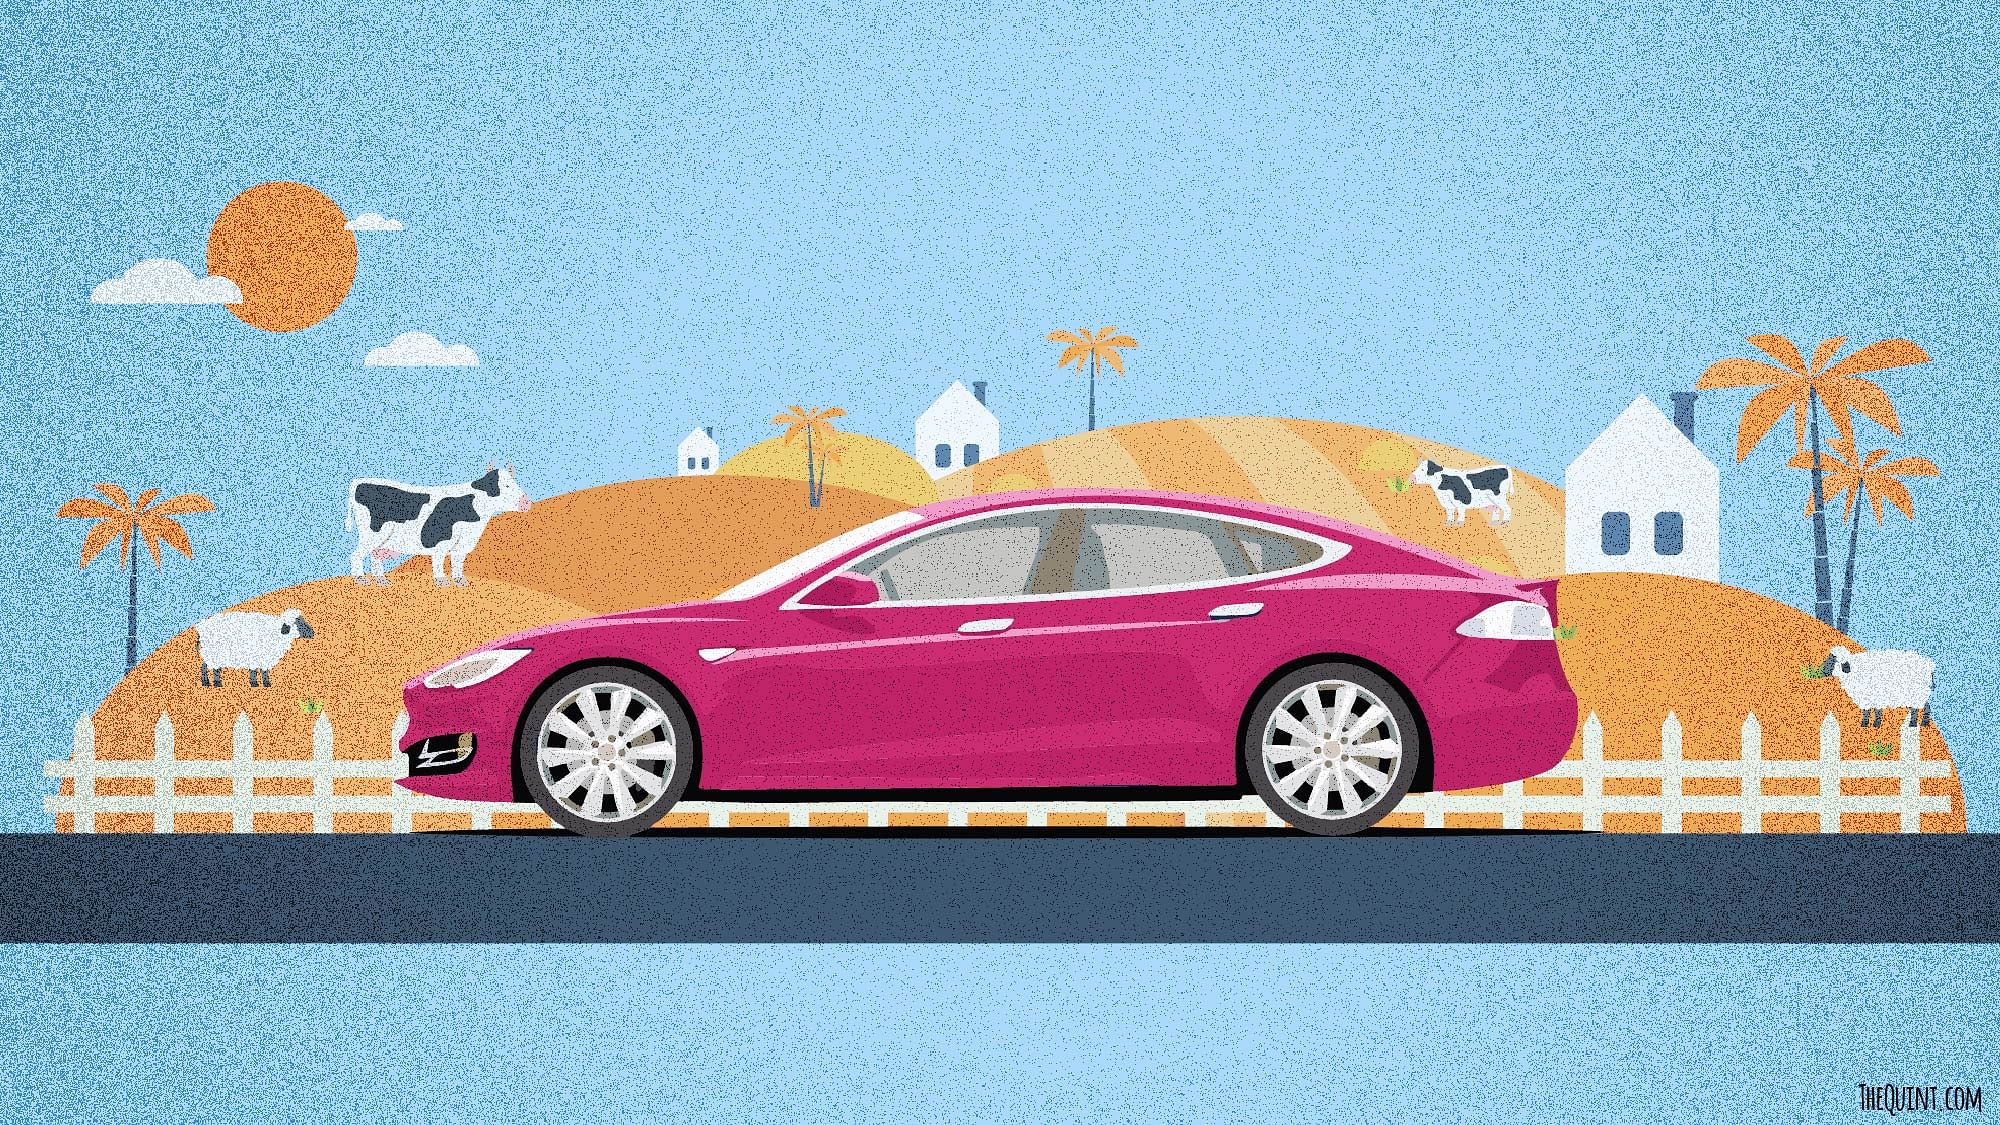 The dream of buying a Tesla in India could be further than we hope.